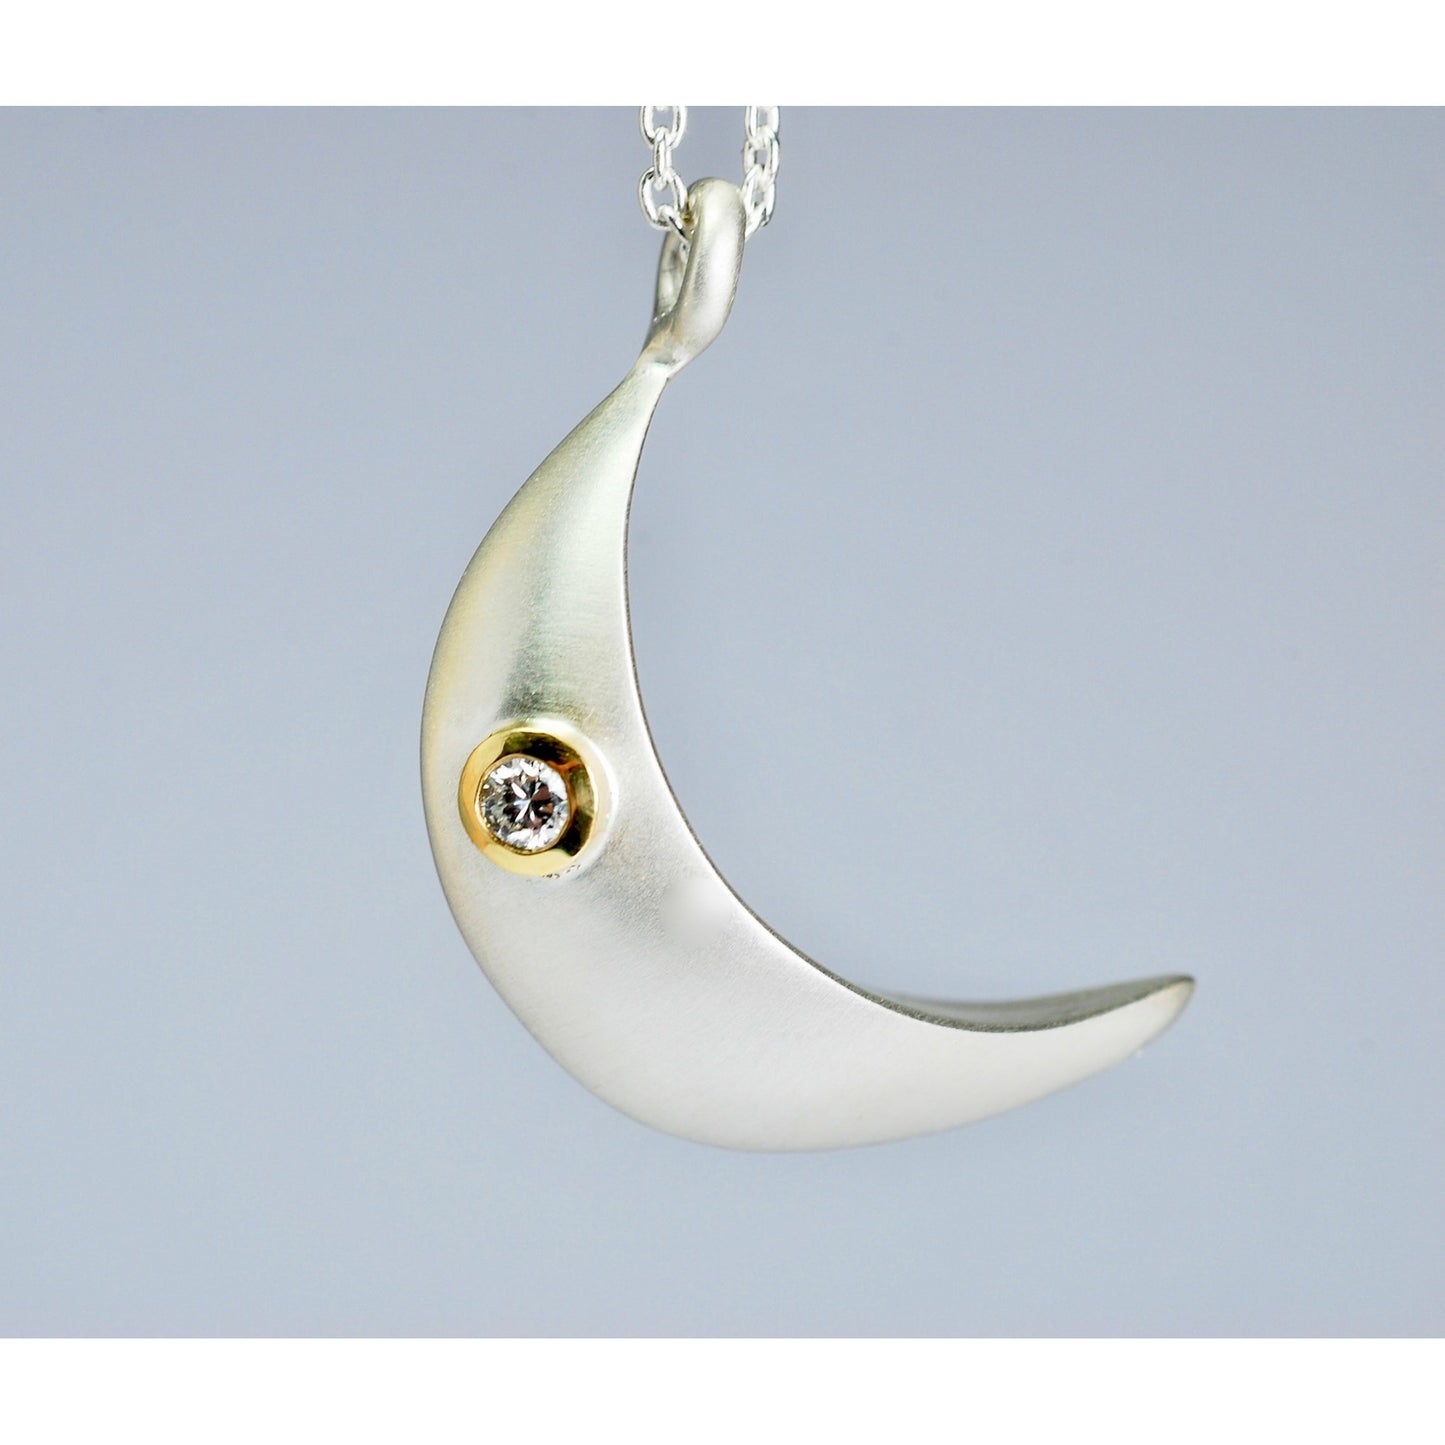 Crescent Moon Necklace / Pendant Details. -1 inch Handmade moon from the top of moon to the bottom. - Stone of your choice. - 24 inch cable chain.